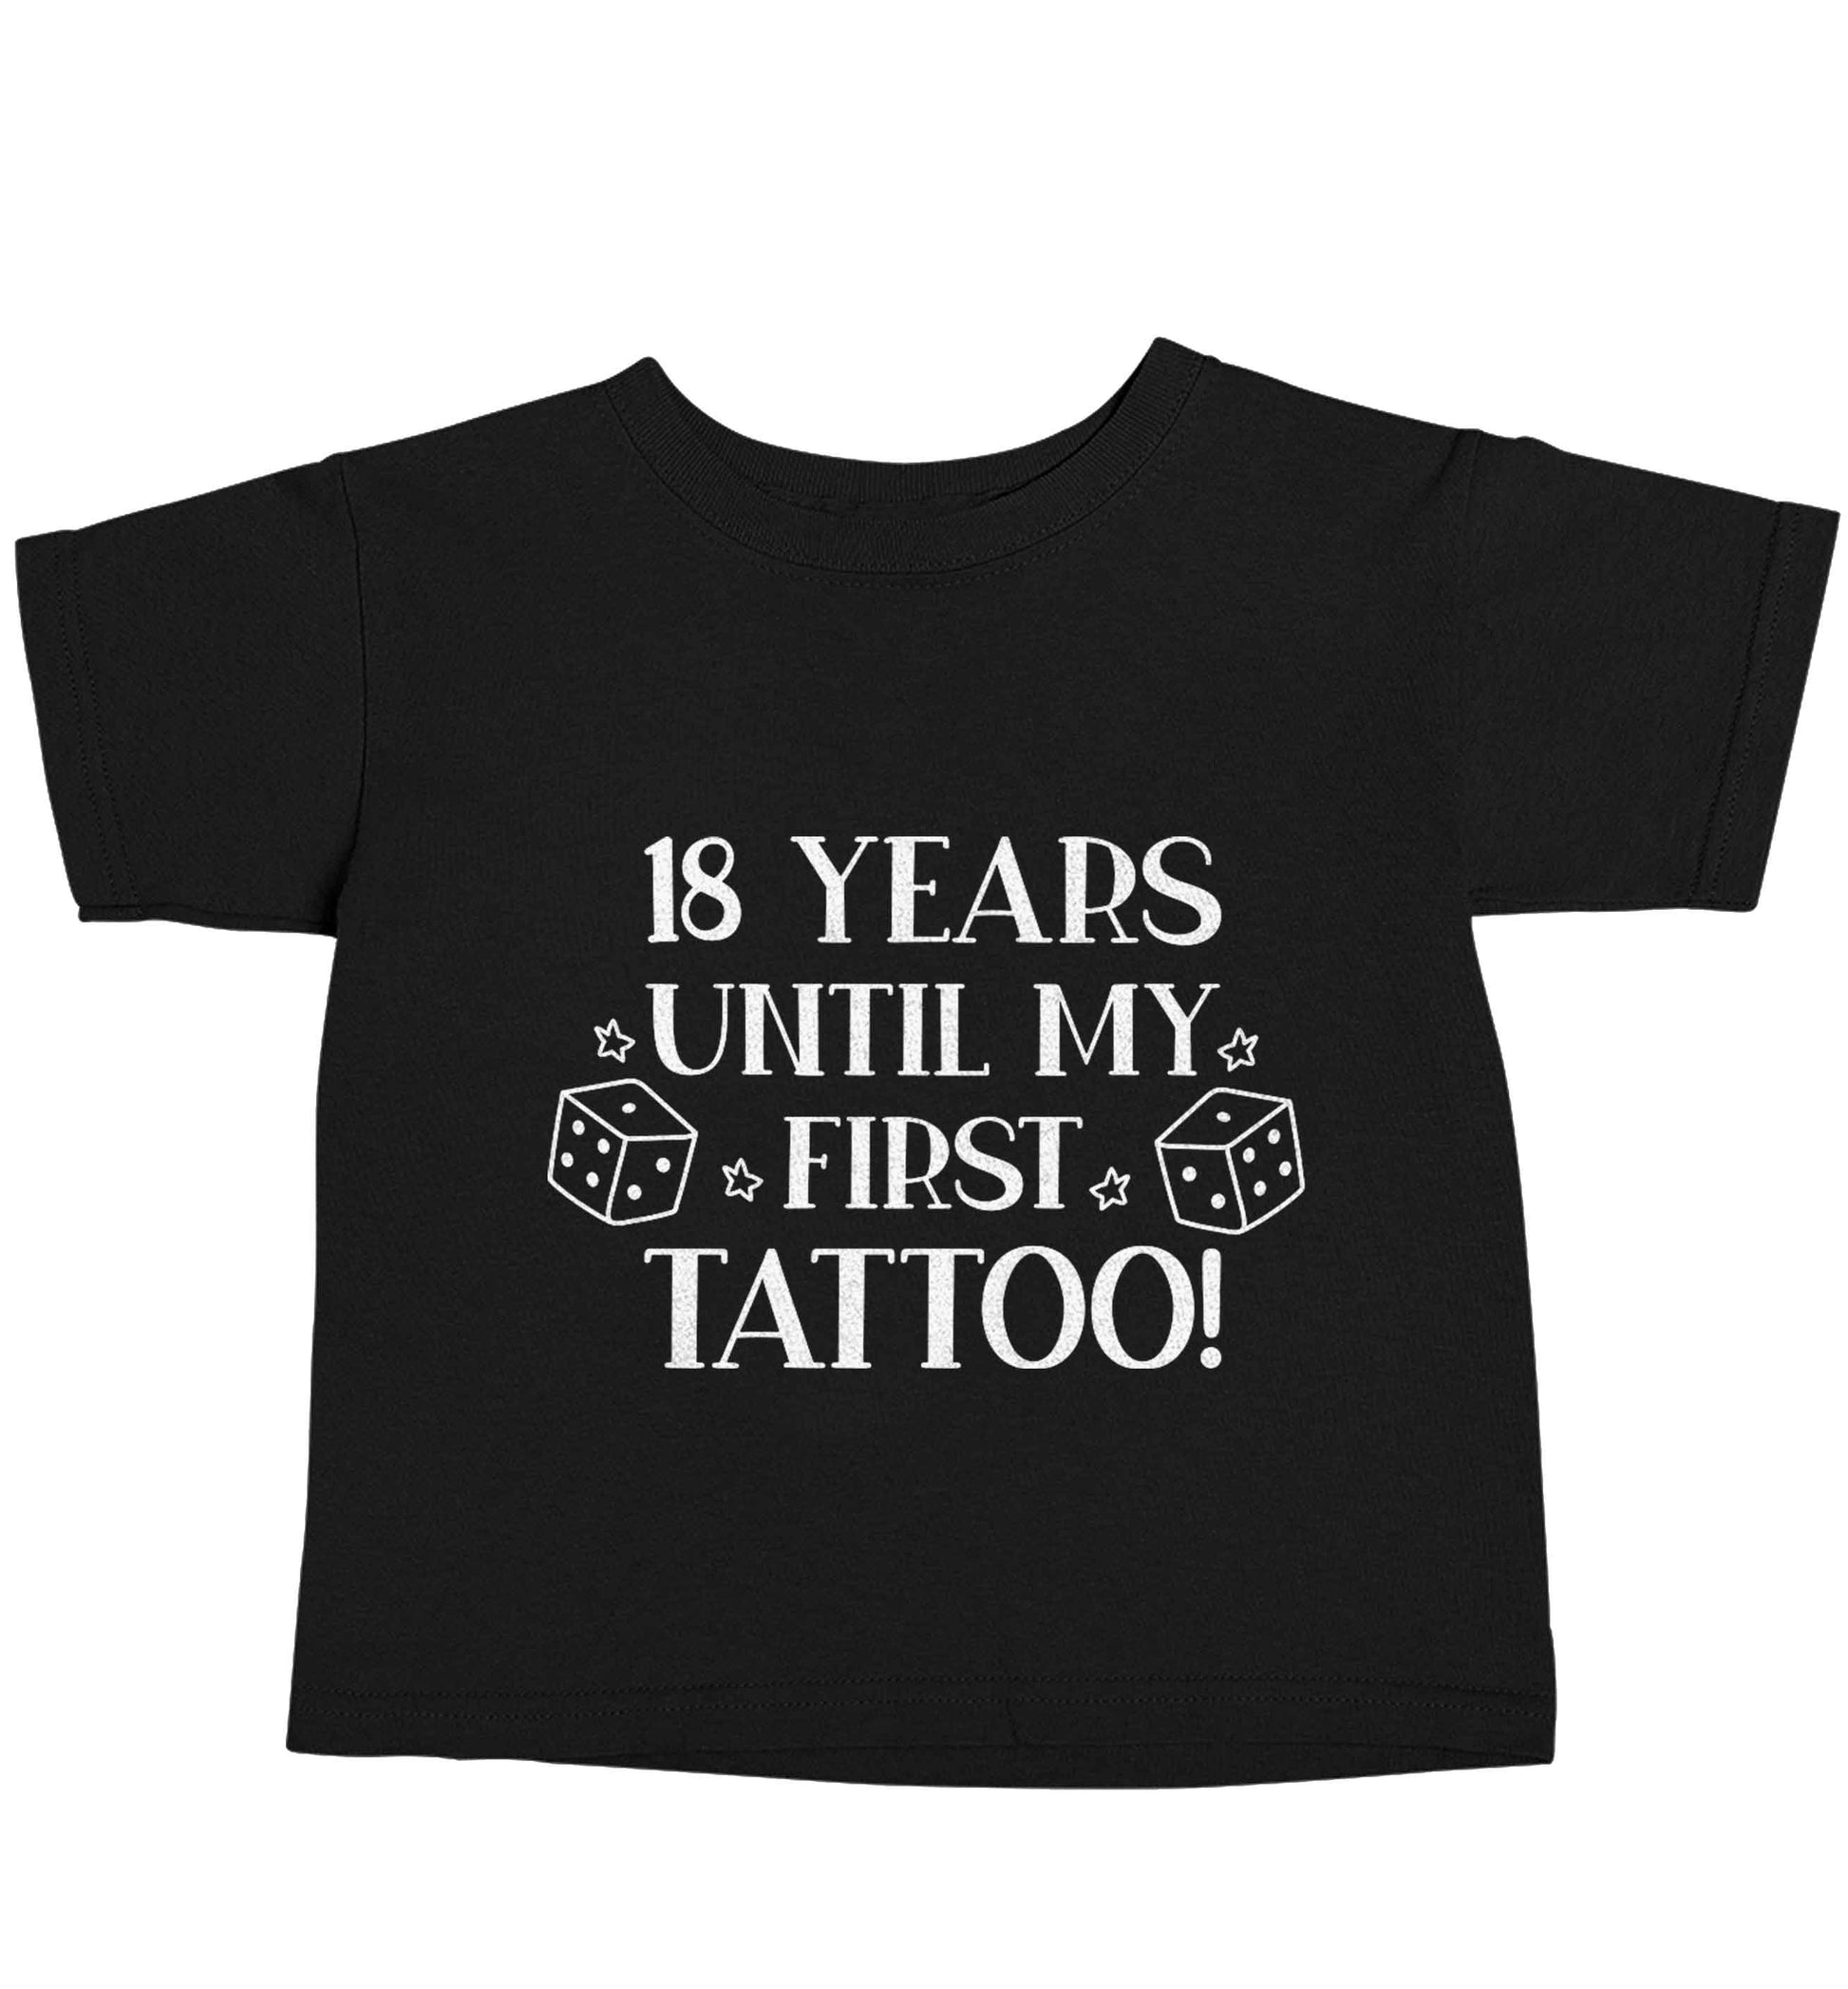 18 Years Until my First Tattoo Black baby toddler Tshirt 2 years